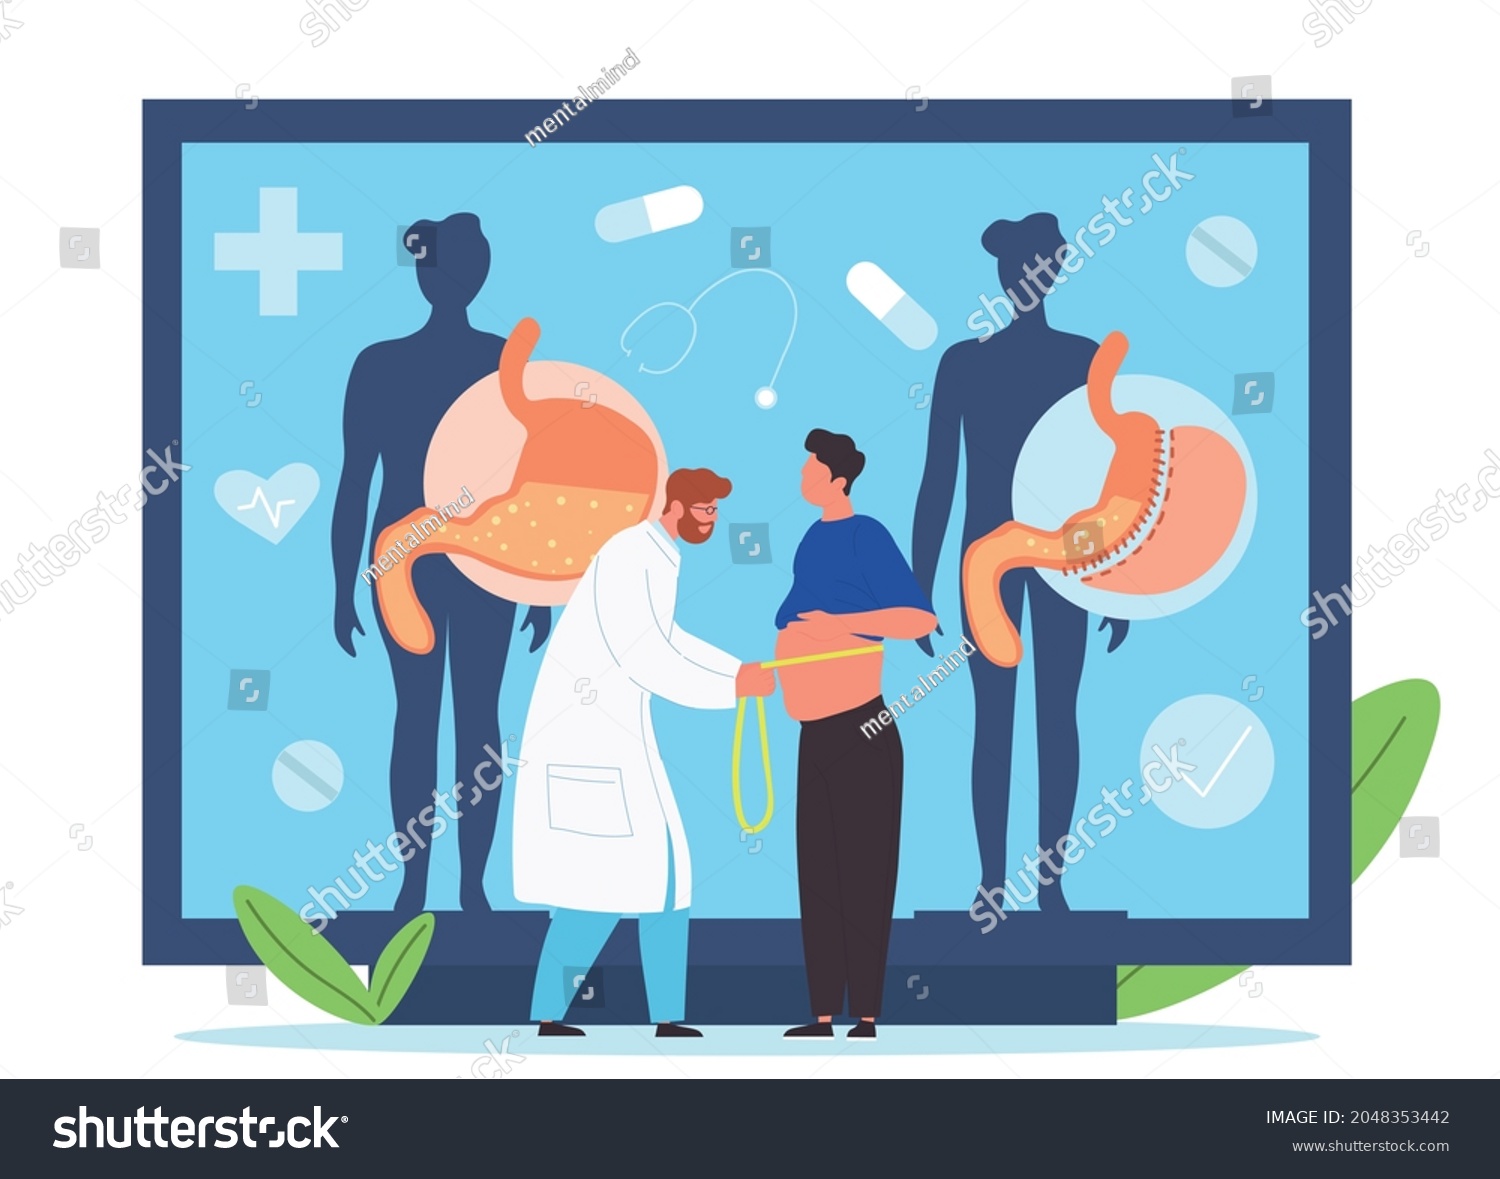 SVG of Male surgeon doctor measuring waist of fat man. Preparing patient for bariatric gastrectomy procedure in clinic. Concept of weight loss medicine. Flat cartoon vector illustration svg